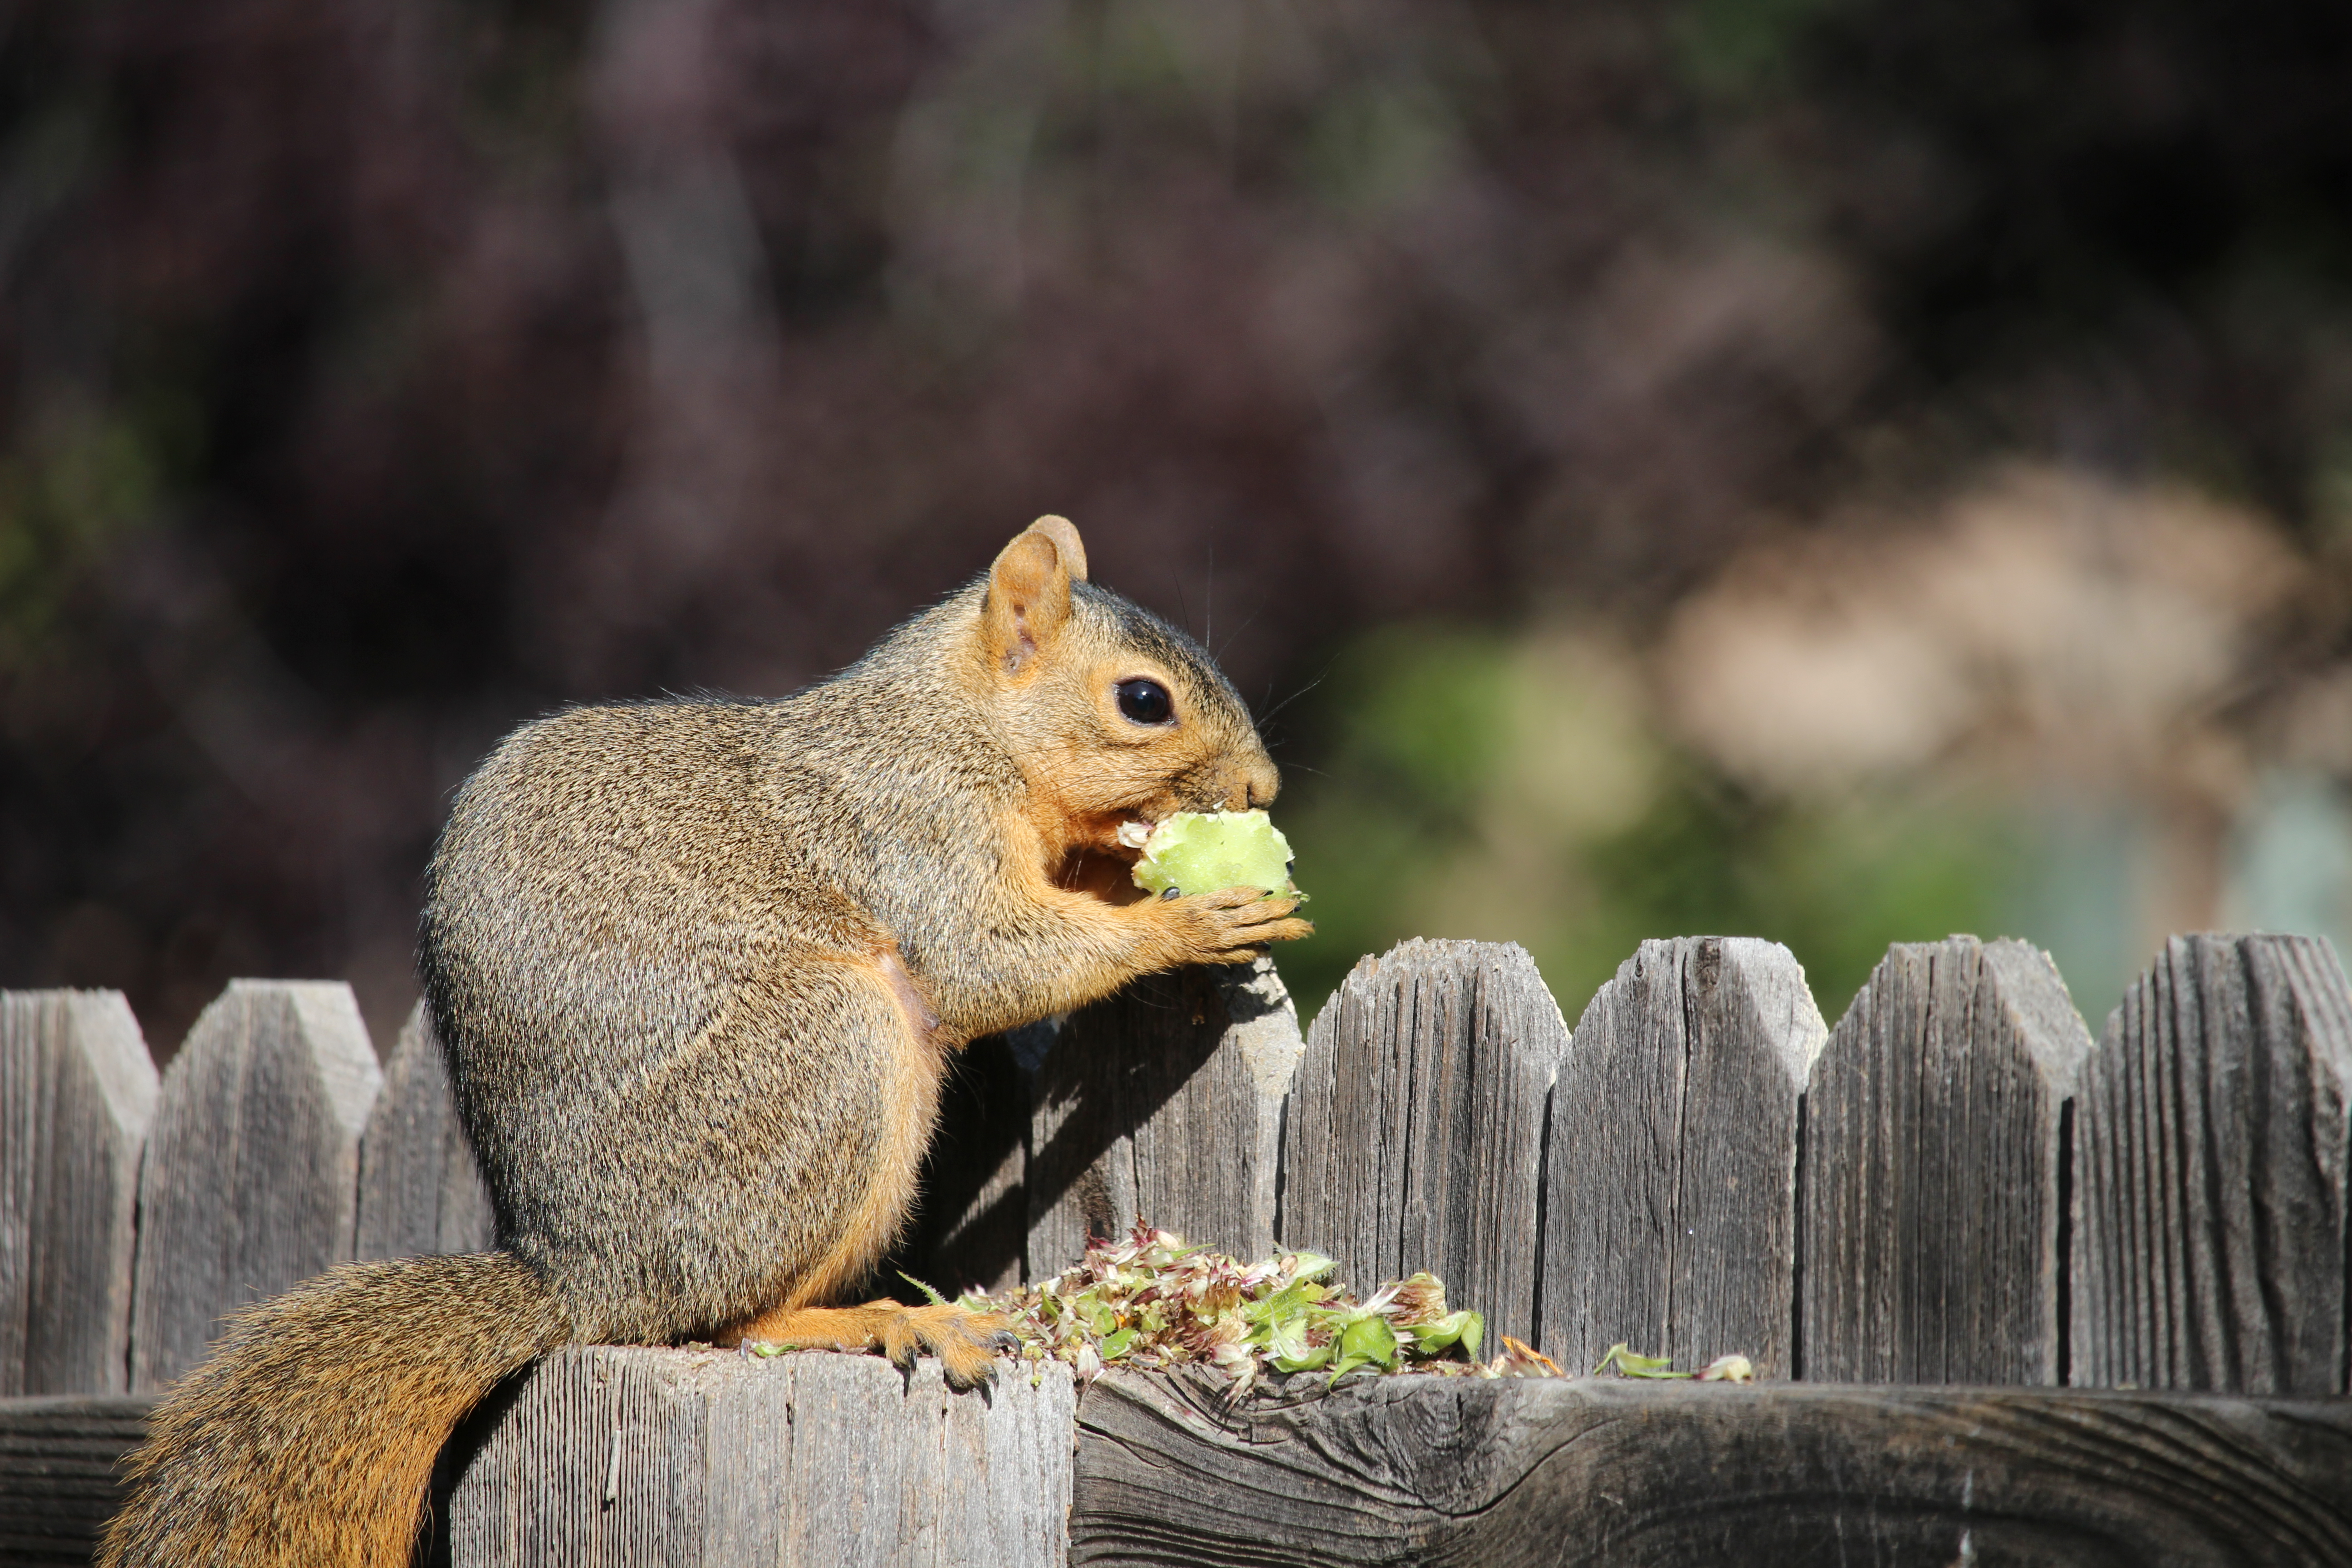 Loveland revamps law to allow squirrel feeding – The Denver Post